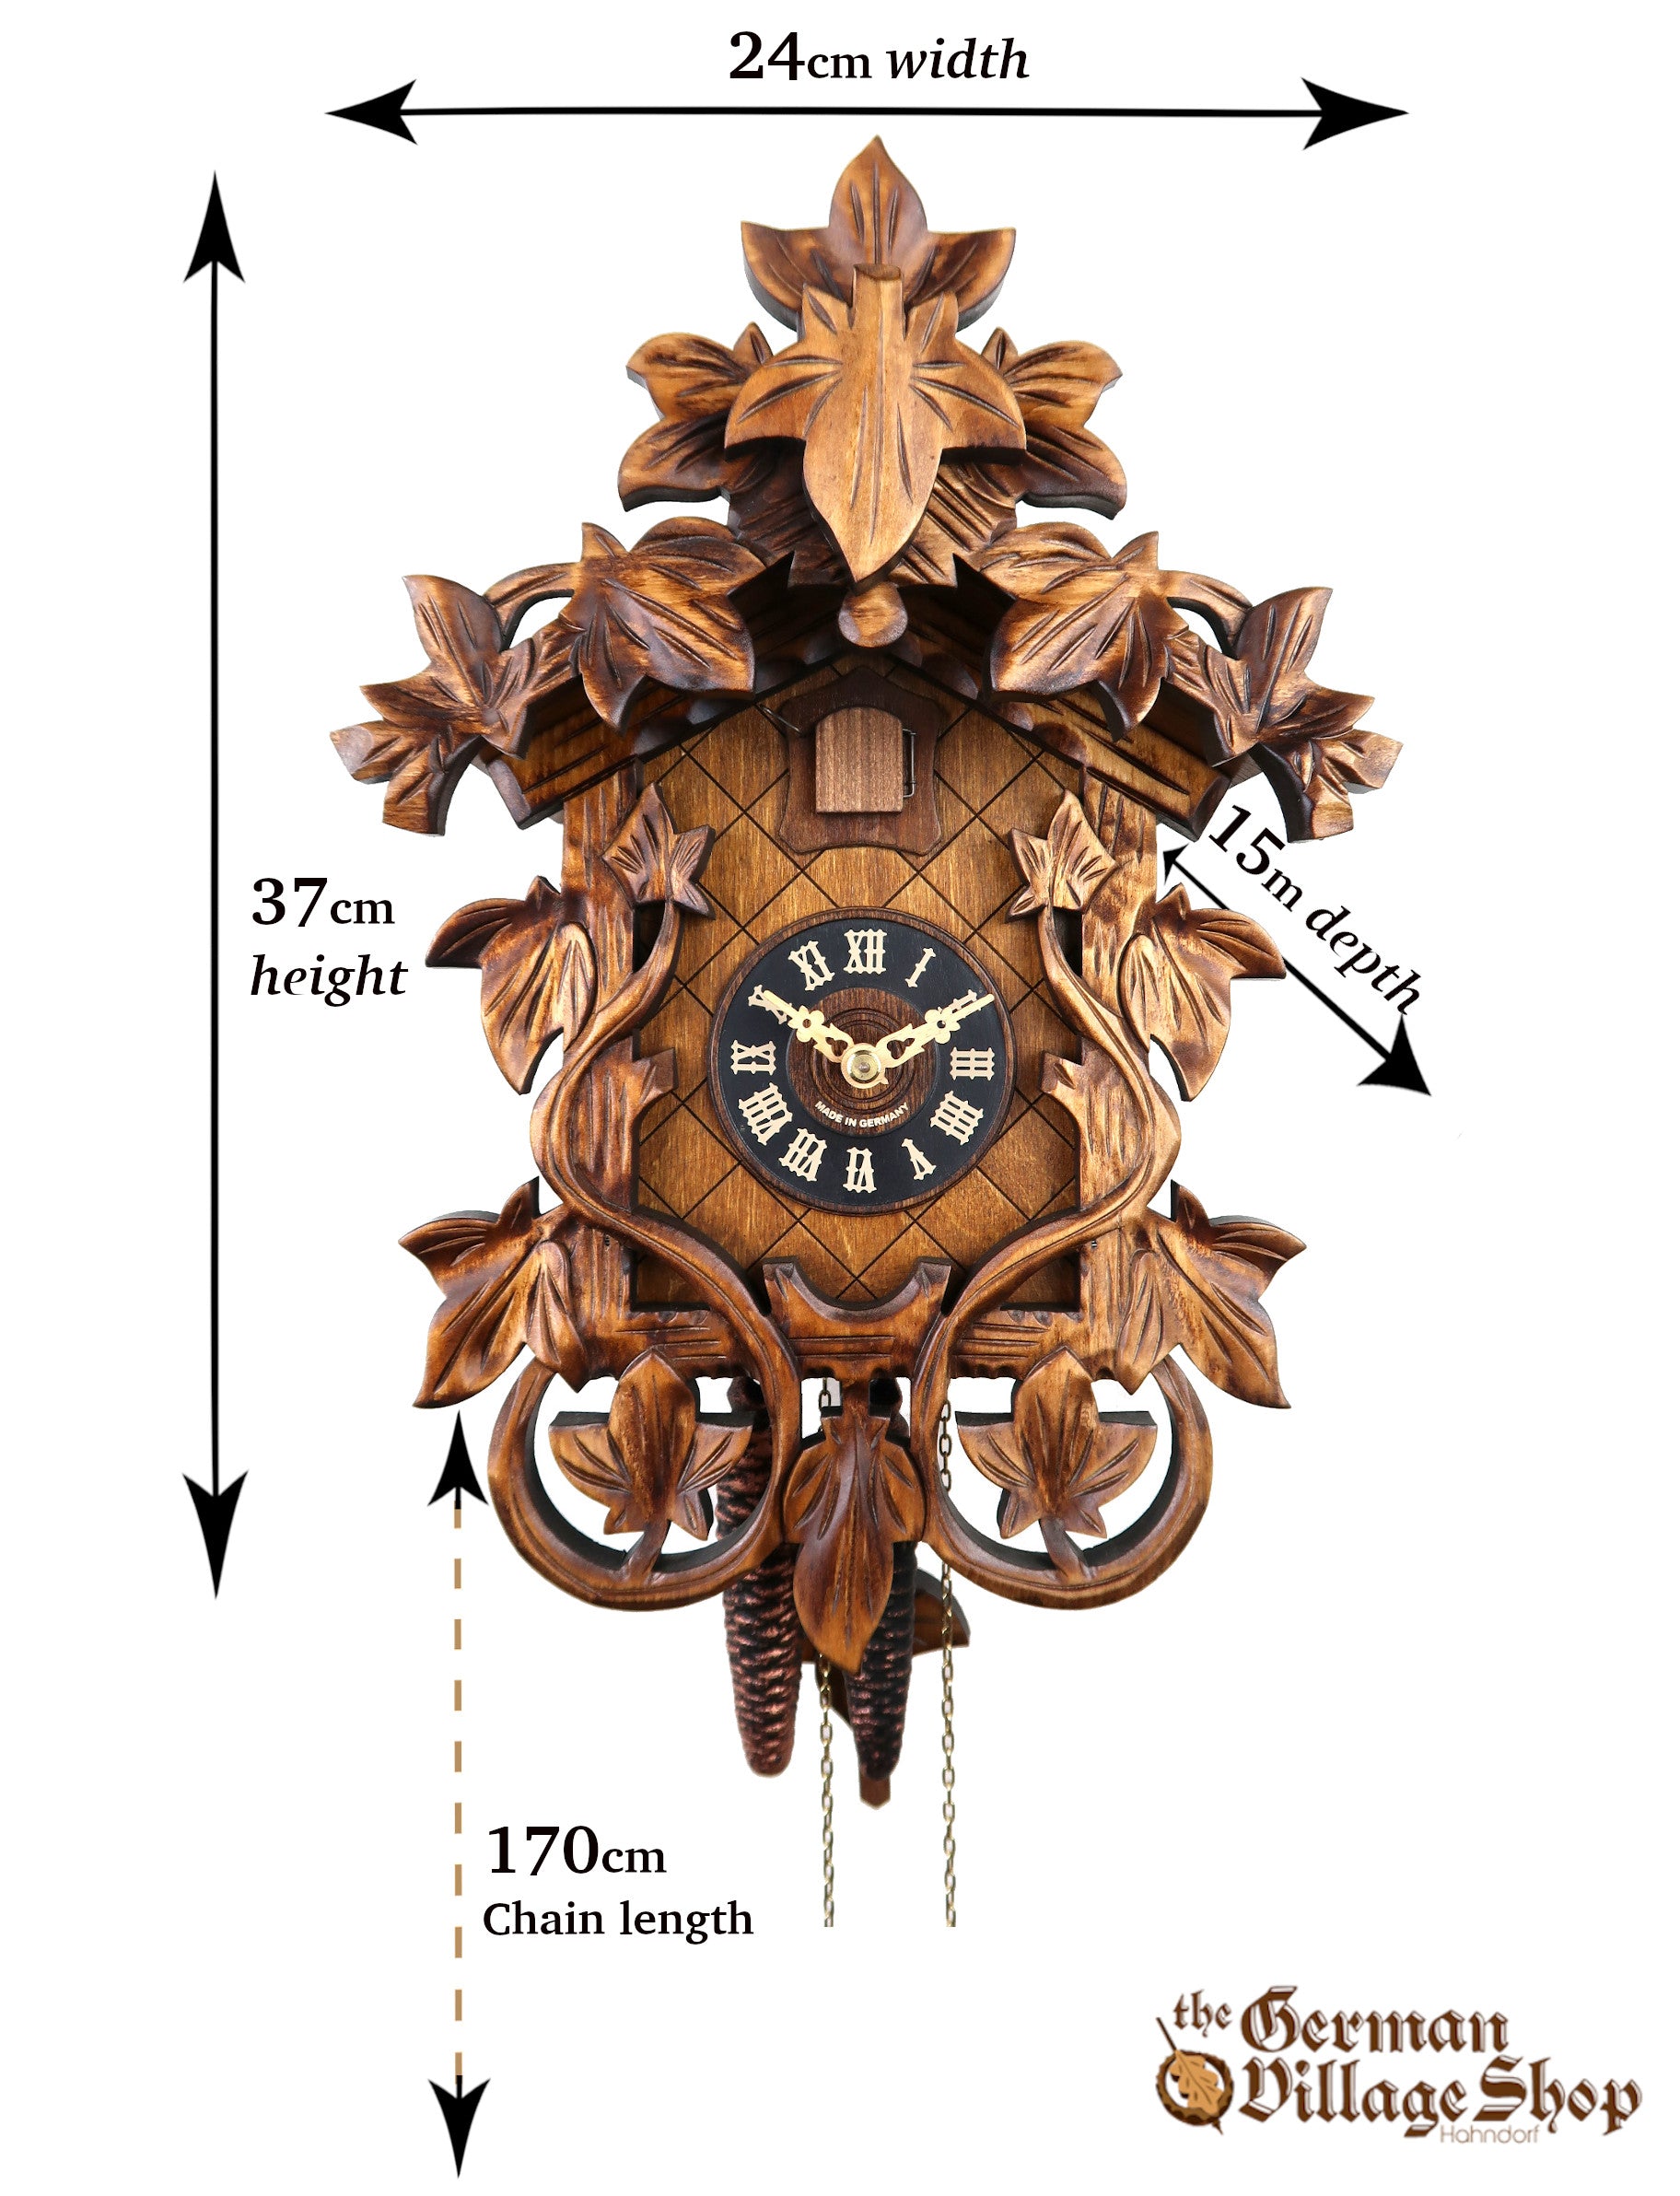 Size of German Cuckoo Clock imported and for sale in Australia